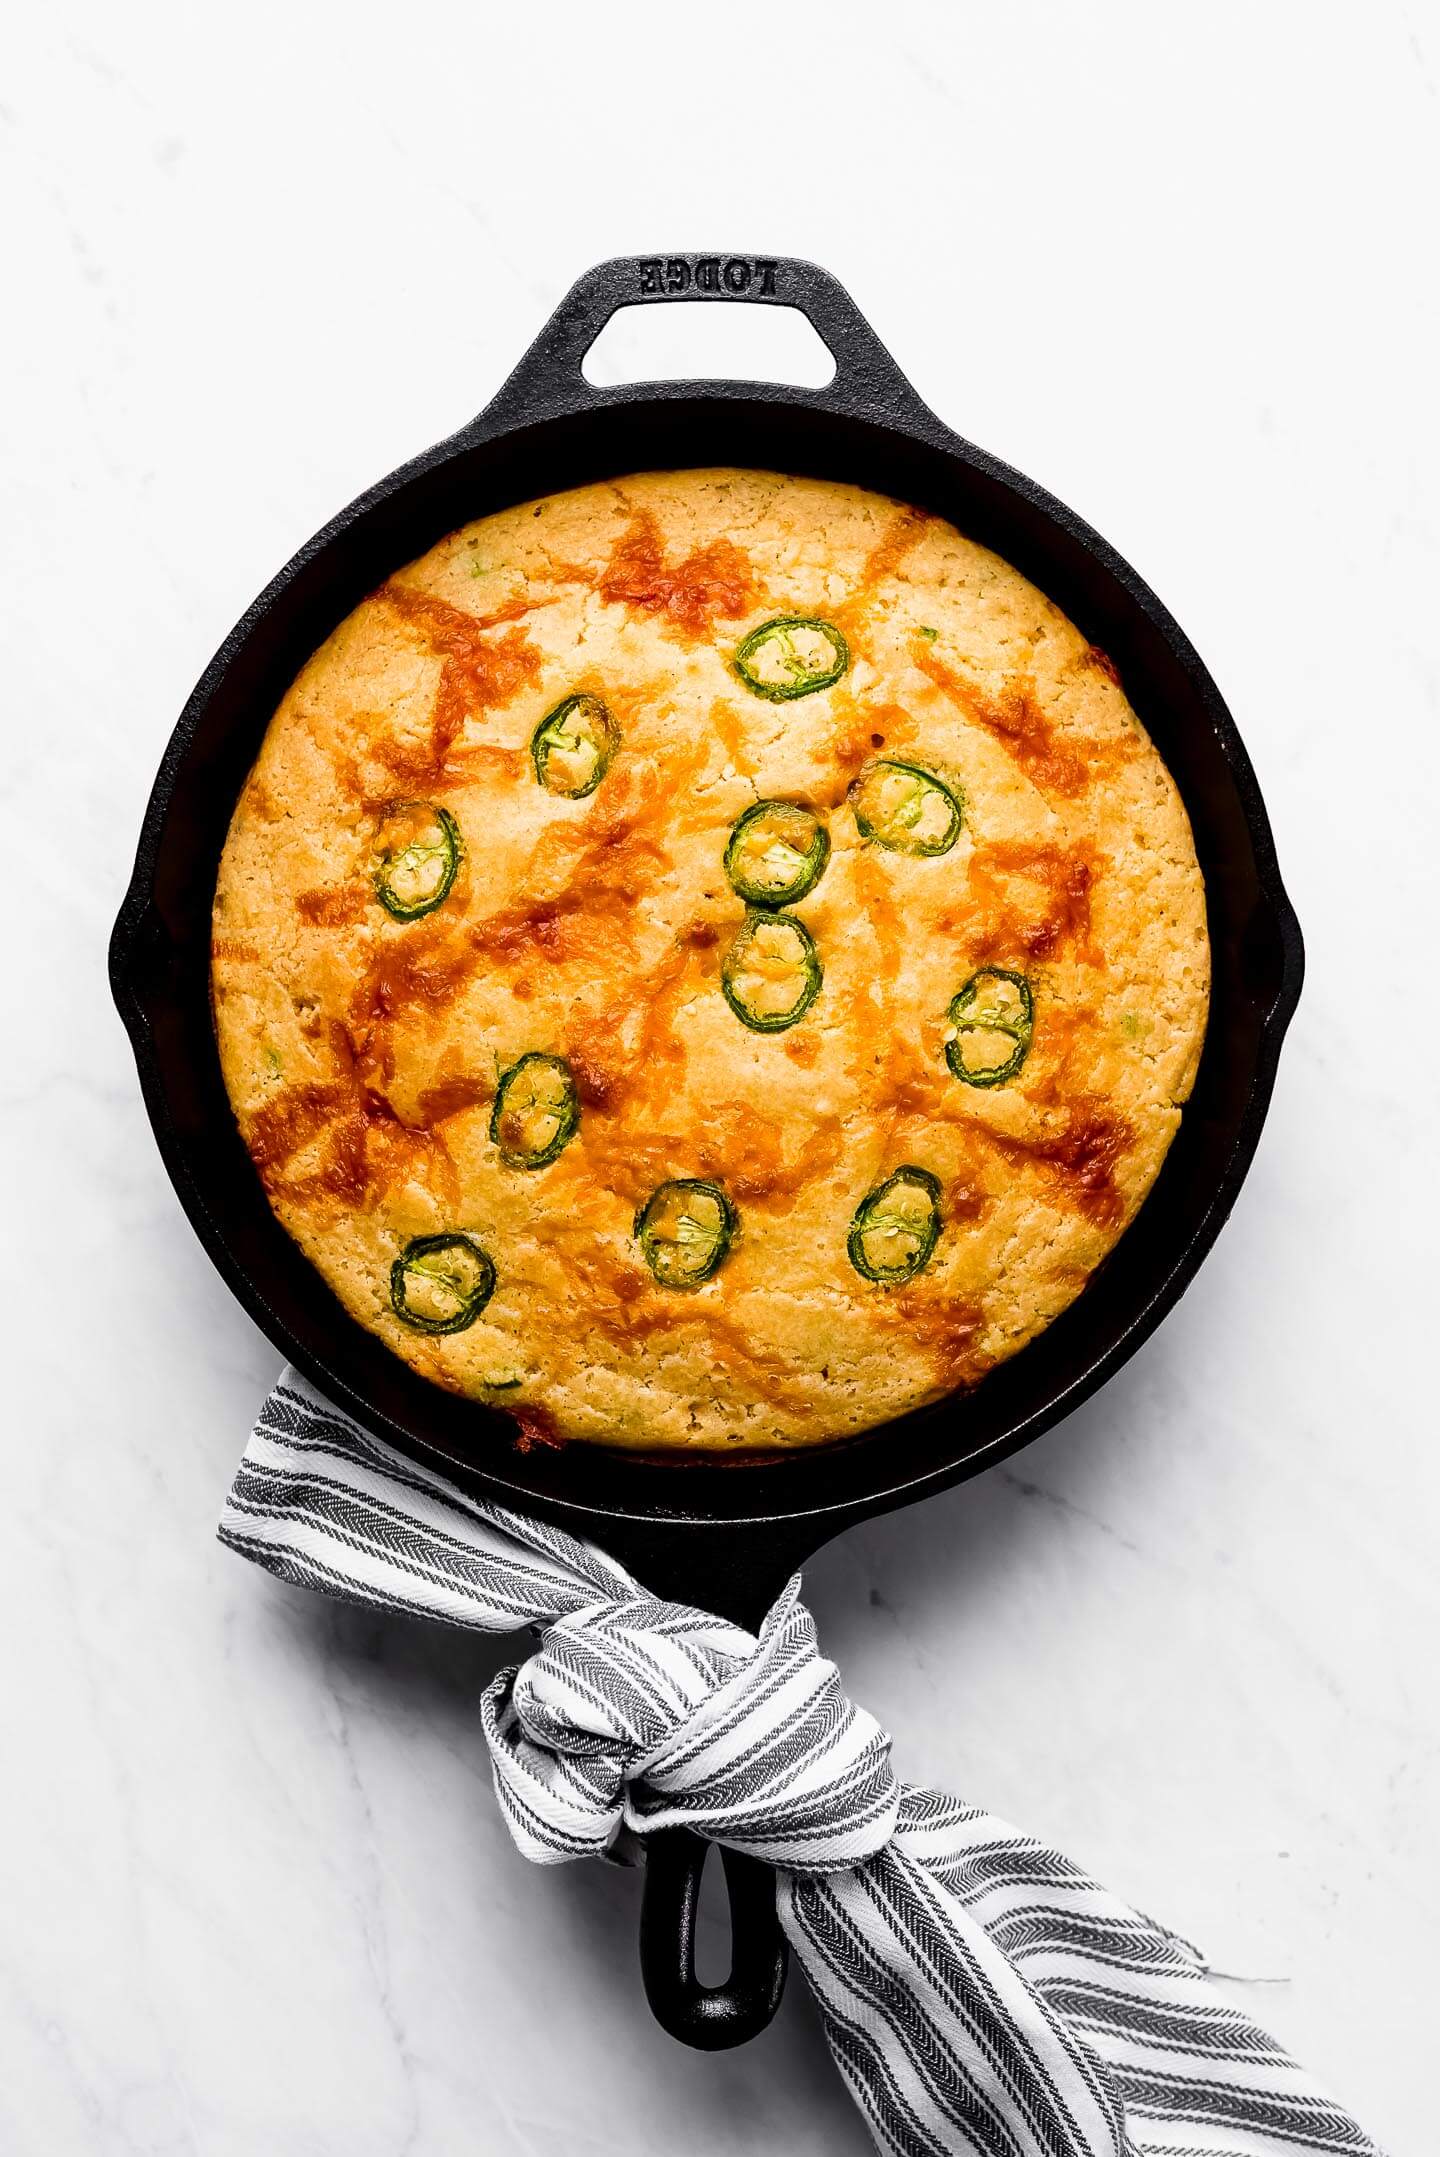 Jalapeno Cheddar Skillet Cornbread in a cast iron skillet with a towel tied around the handle.